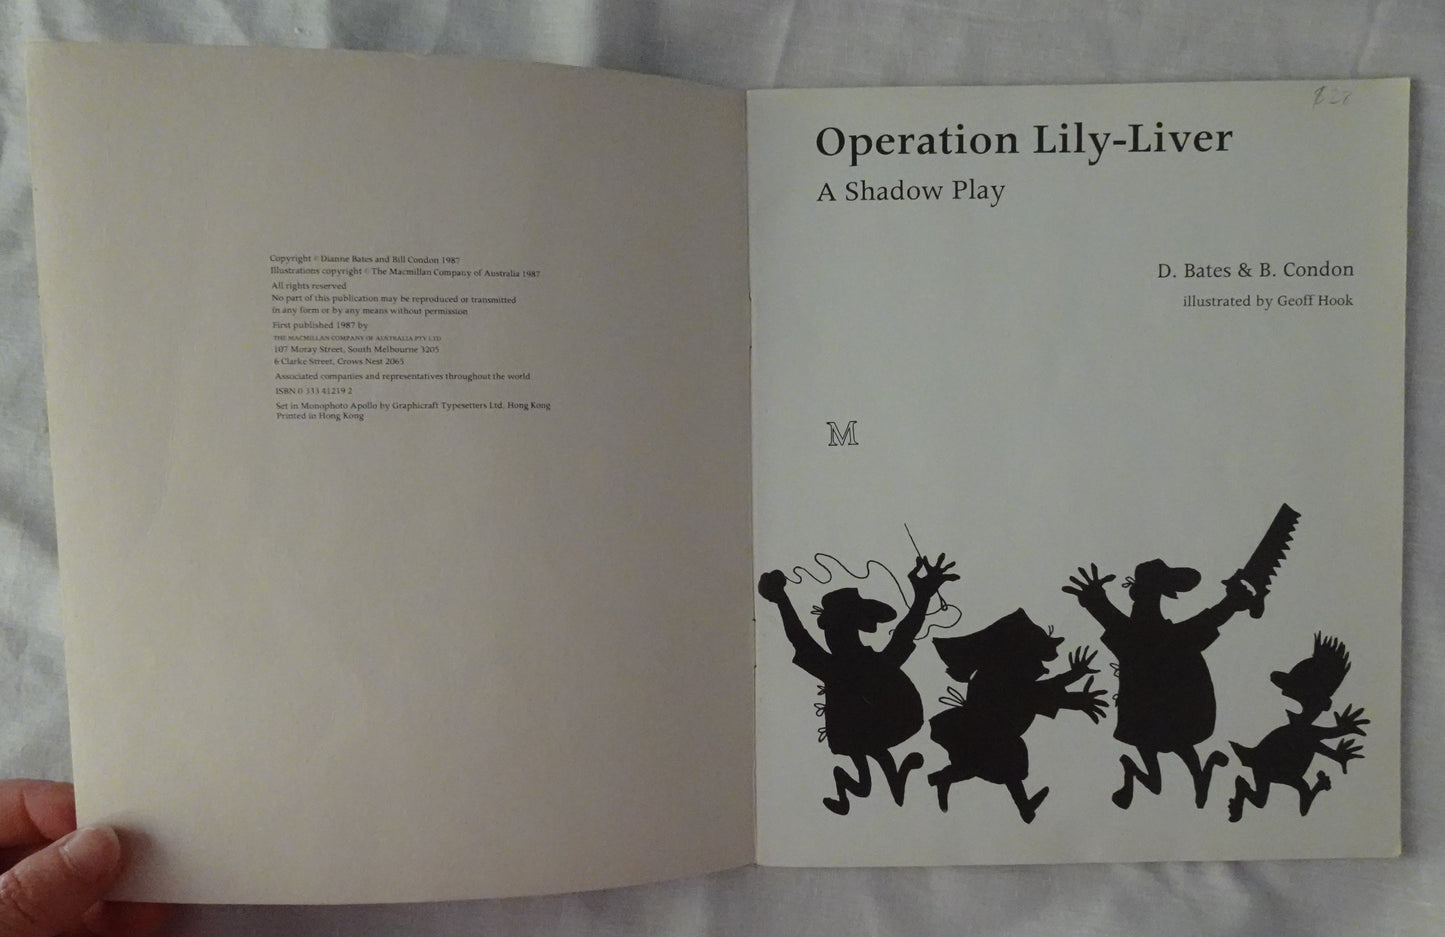 Operation Lily-Liver by D. Bates and B. Condon